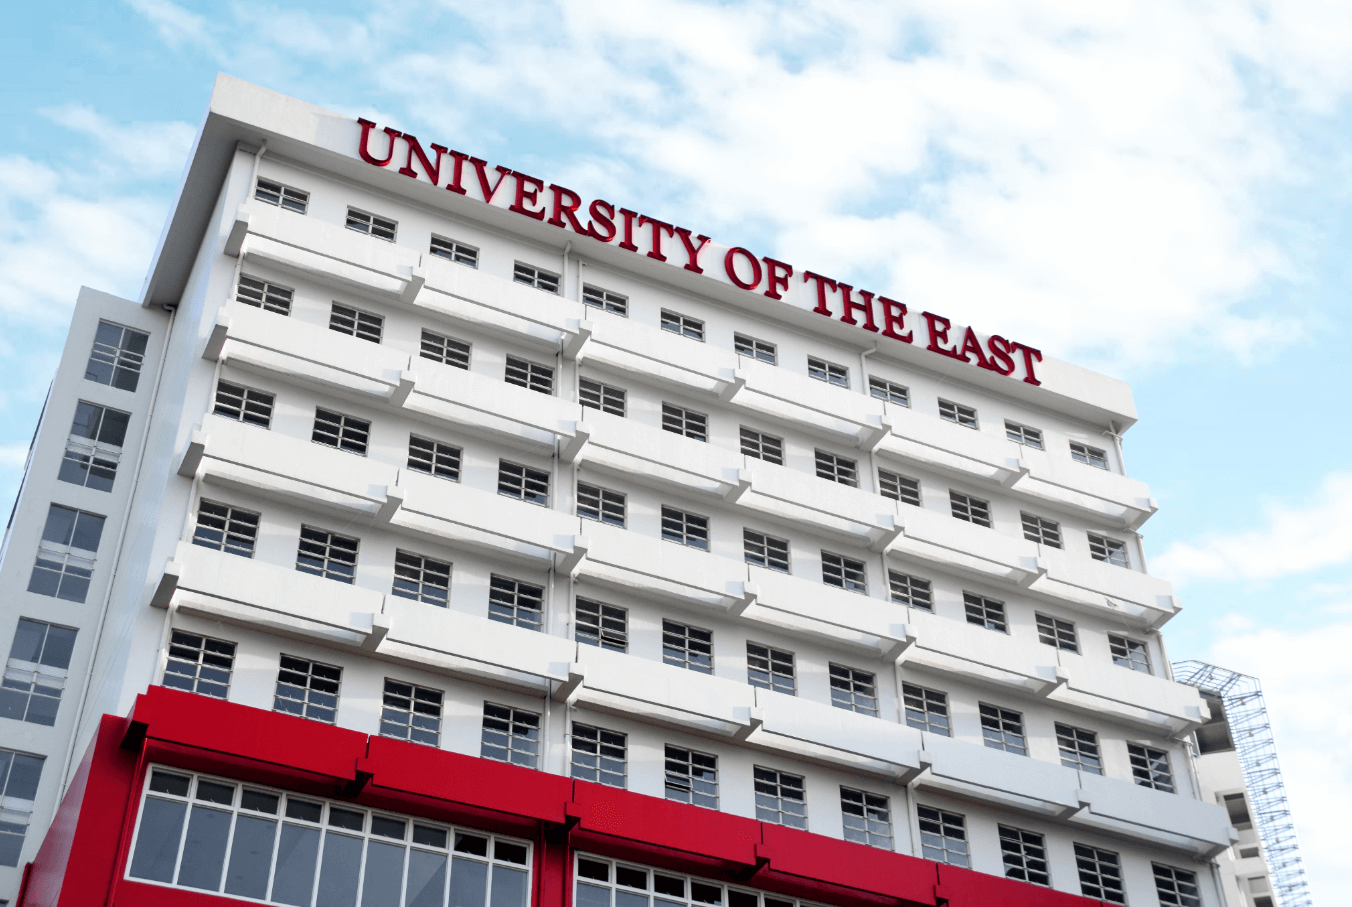 The University of the East